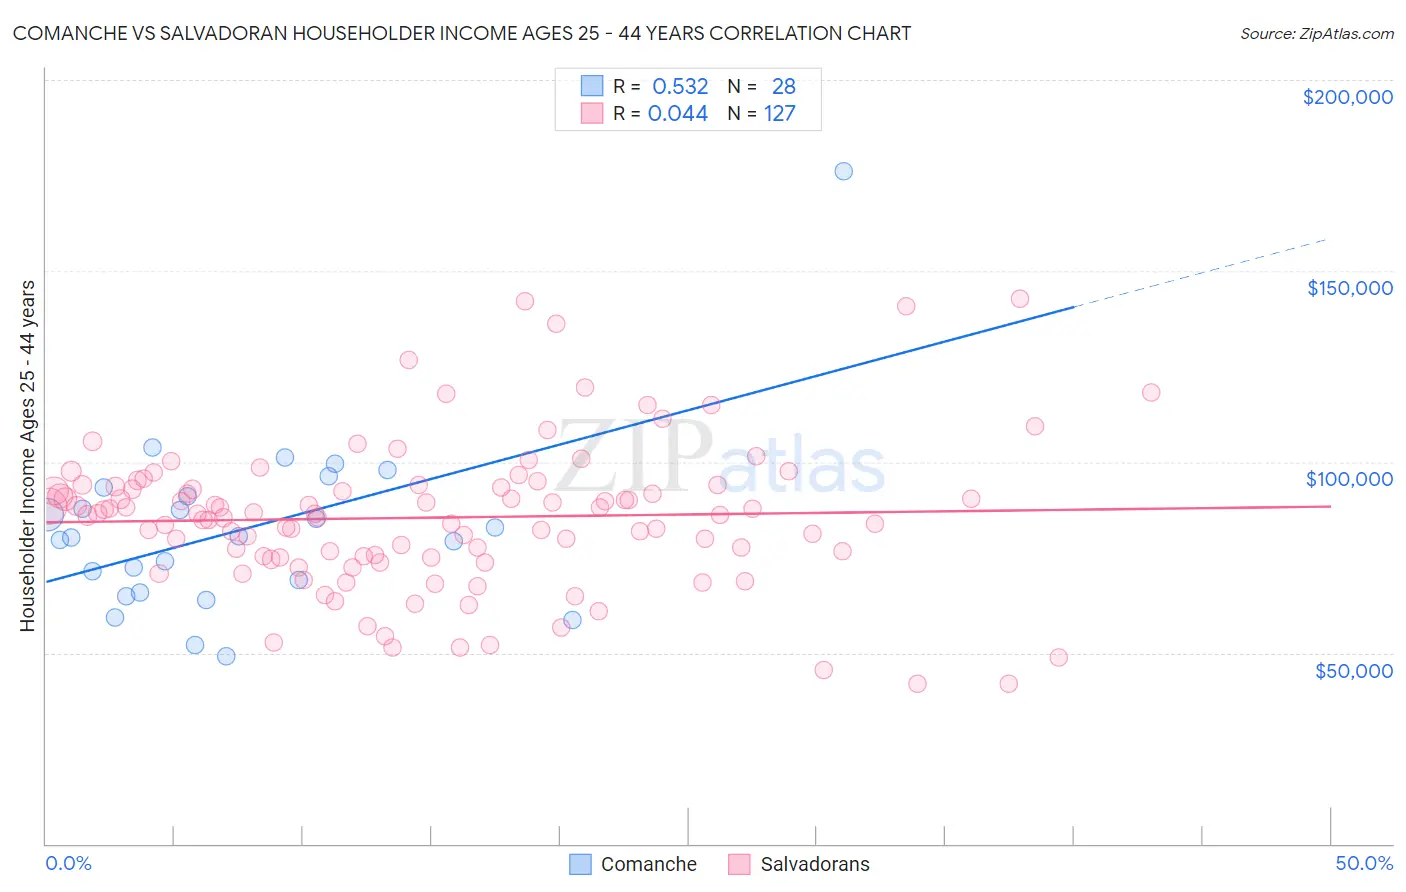 Comanche vs Salvadoran Householder Income Ages 25 - 44 years